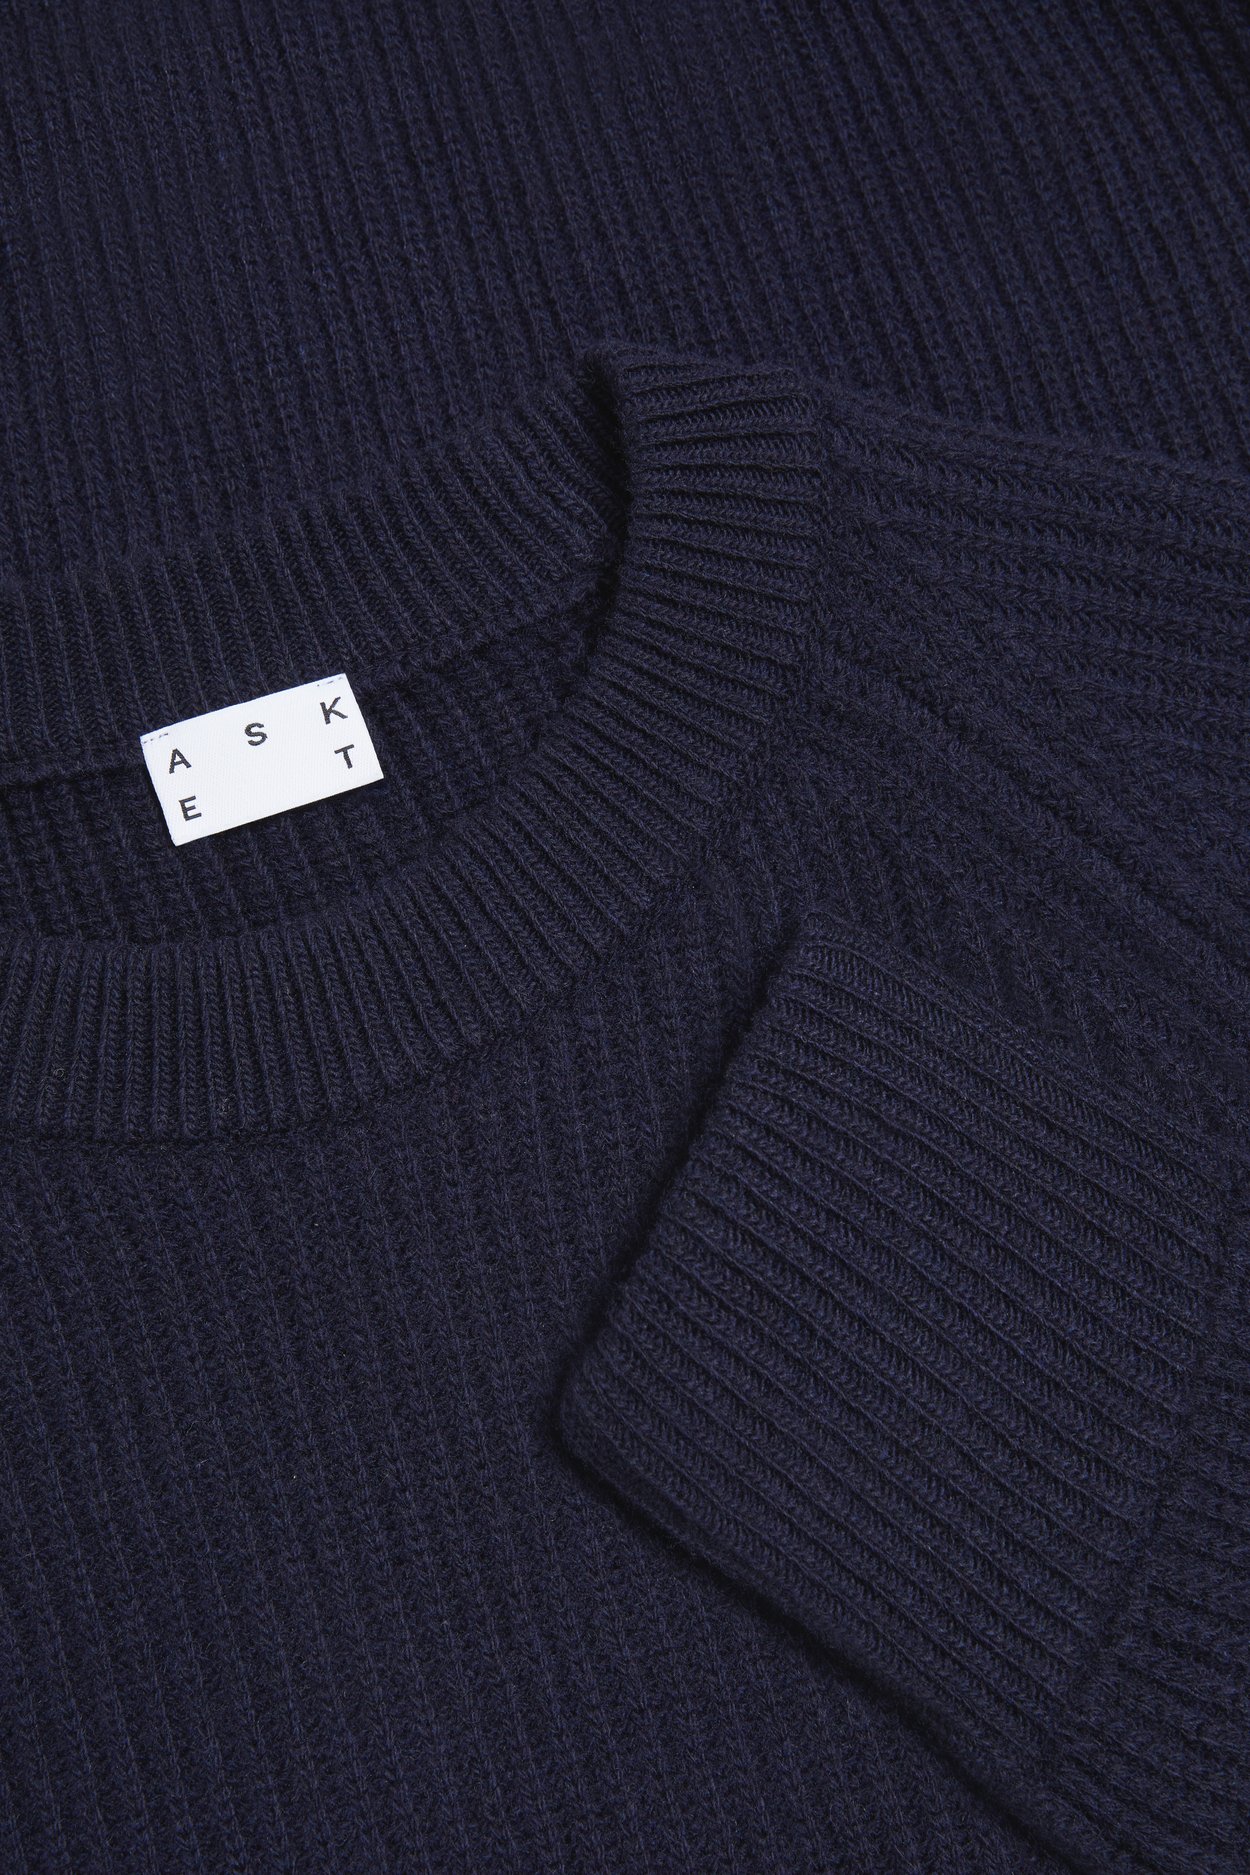 A chunky knit made from 100% recycled wool